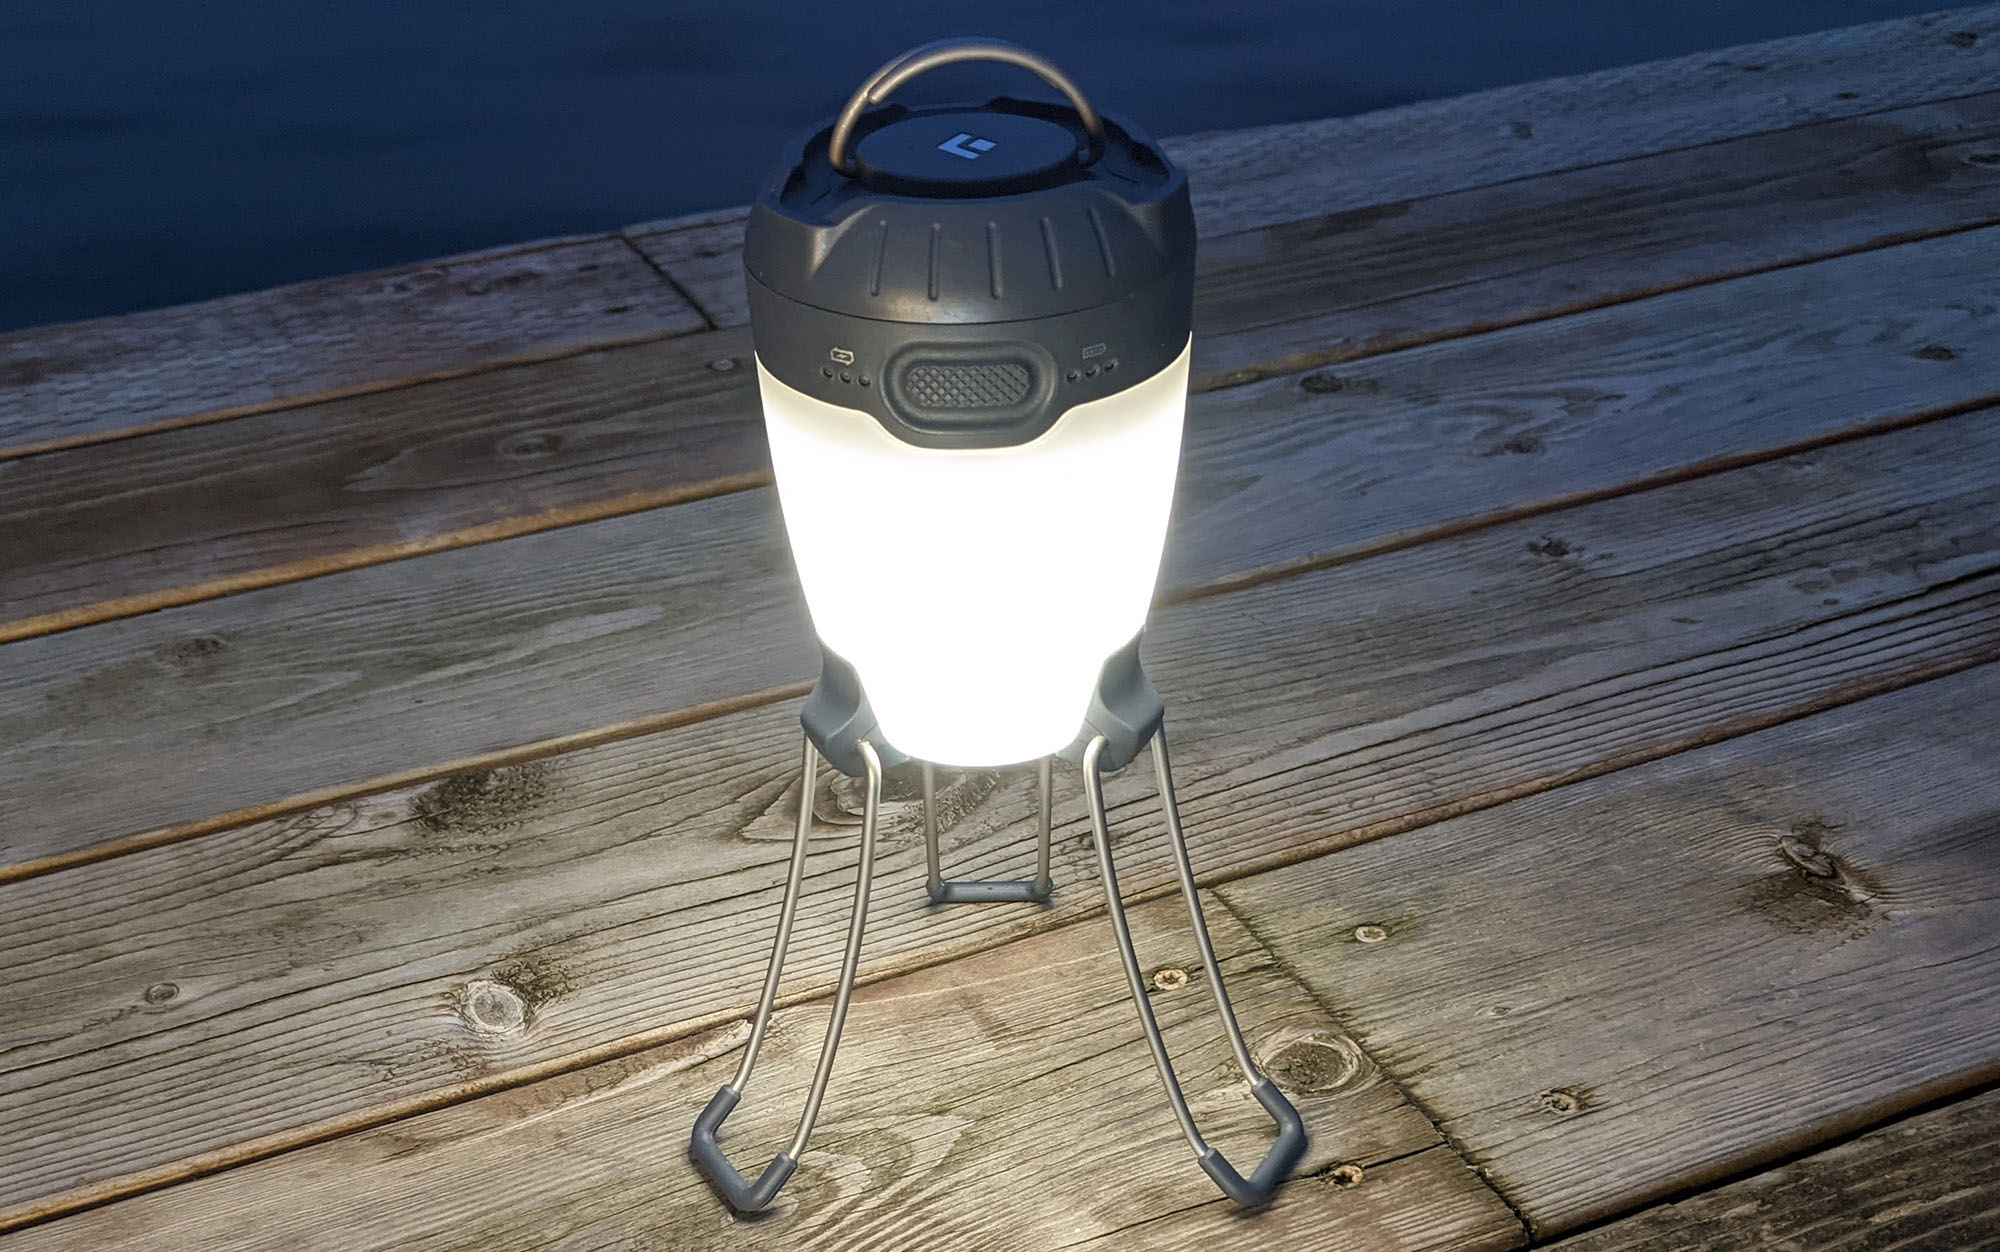 The Black Diamond Apollo is the overall best camping lantern.